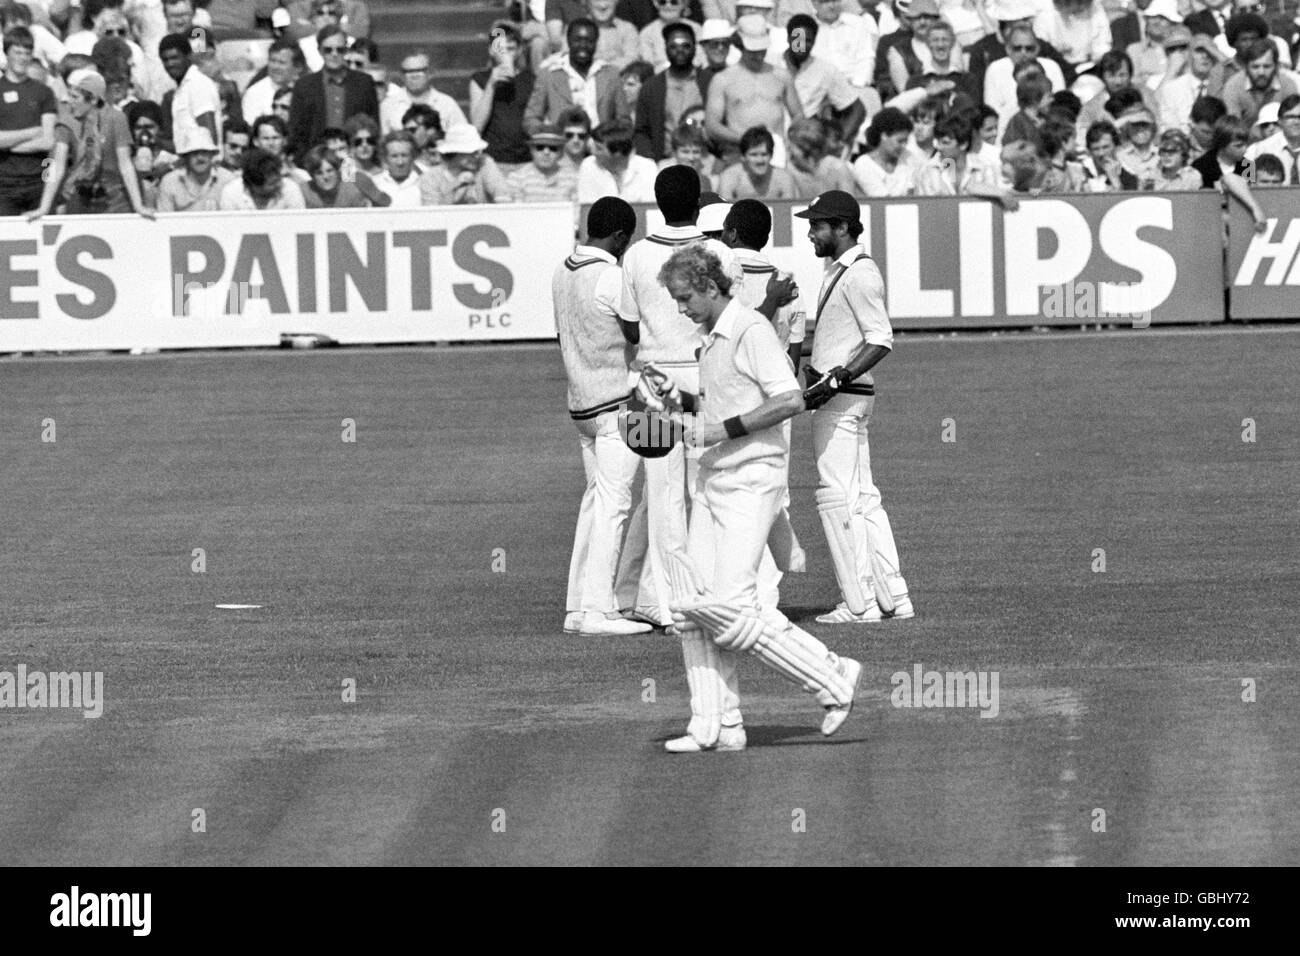 In the Texaco Trophy test match,England Captain David Gower walks back to the pavilion after being caught by West Indies cricketer Gordon Greenidge off the bowling of Malcolm Marshall for 15 runs. Stock Photo